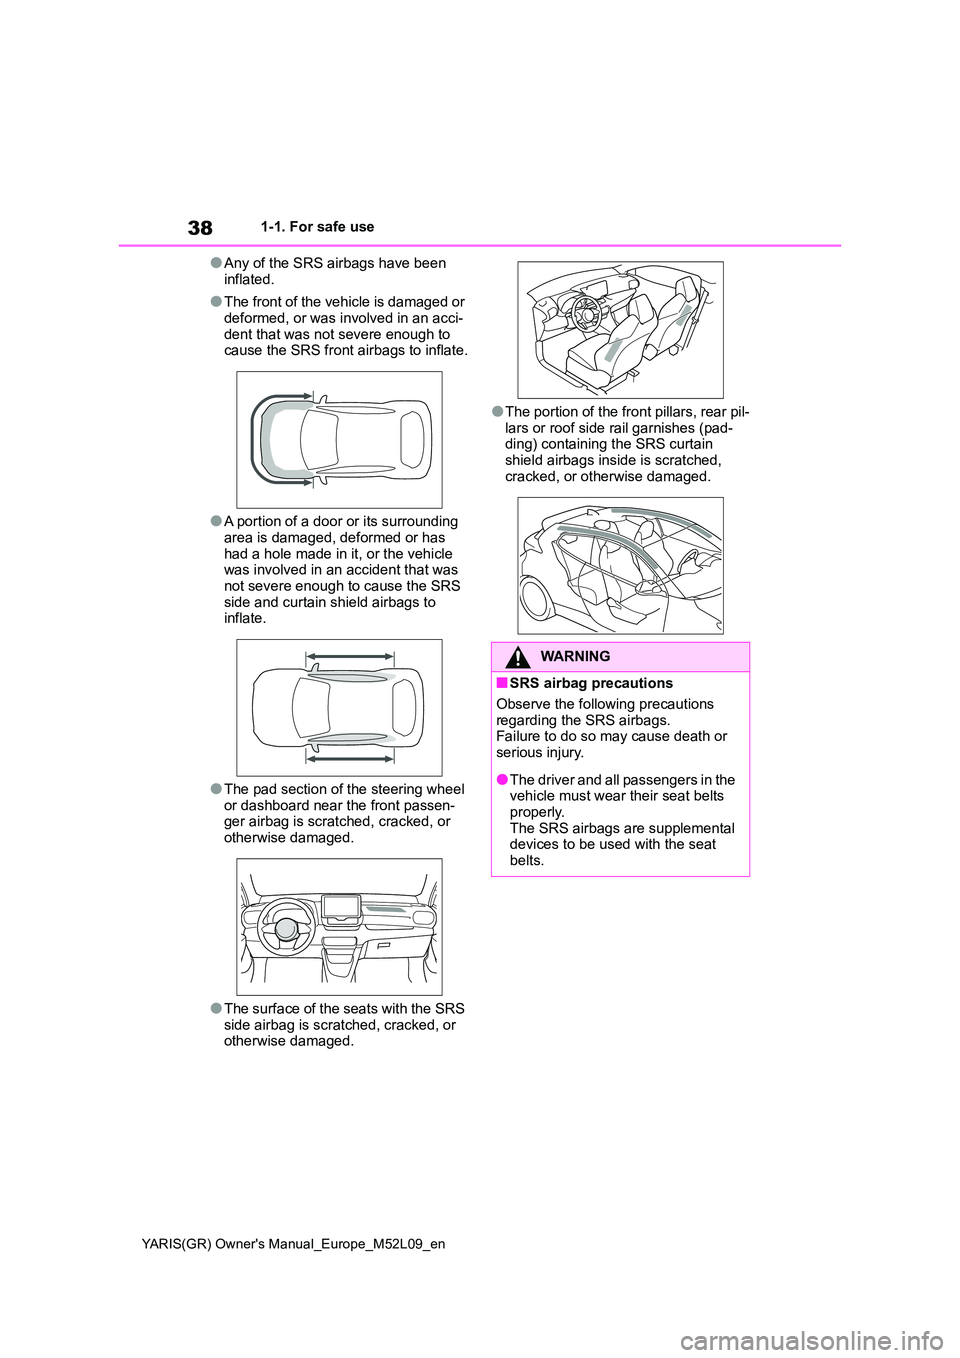 TOYOTA GR YARIS 2020  Owners Manual (in English) 38
YARIS(GR) Owners Manual_Europe_M52L09_en
1-1. For safe use
●Any of the SRS airbags have been  
inflated.
●The front of the vehicle is damaged or 
deformed, or was involved in an acci- dent tha